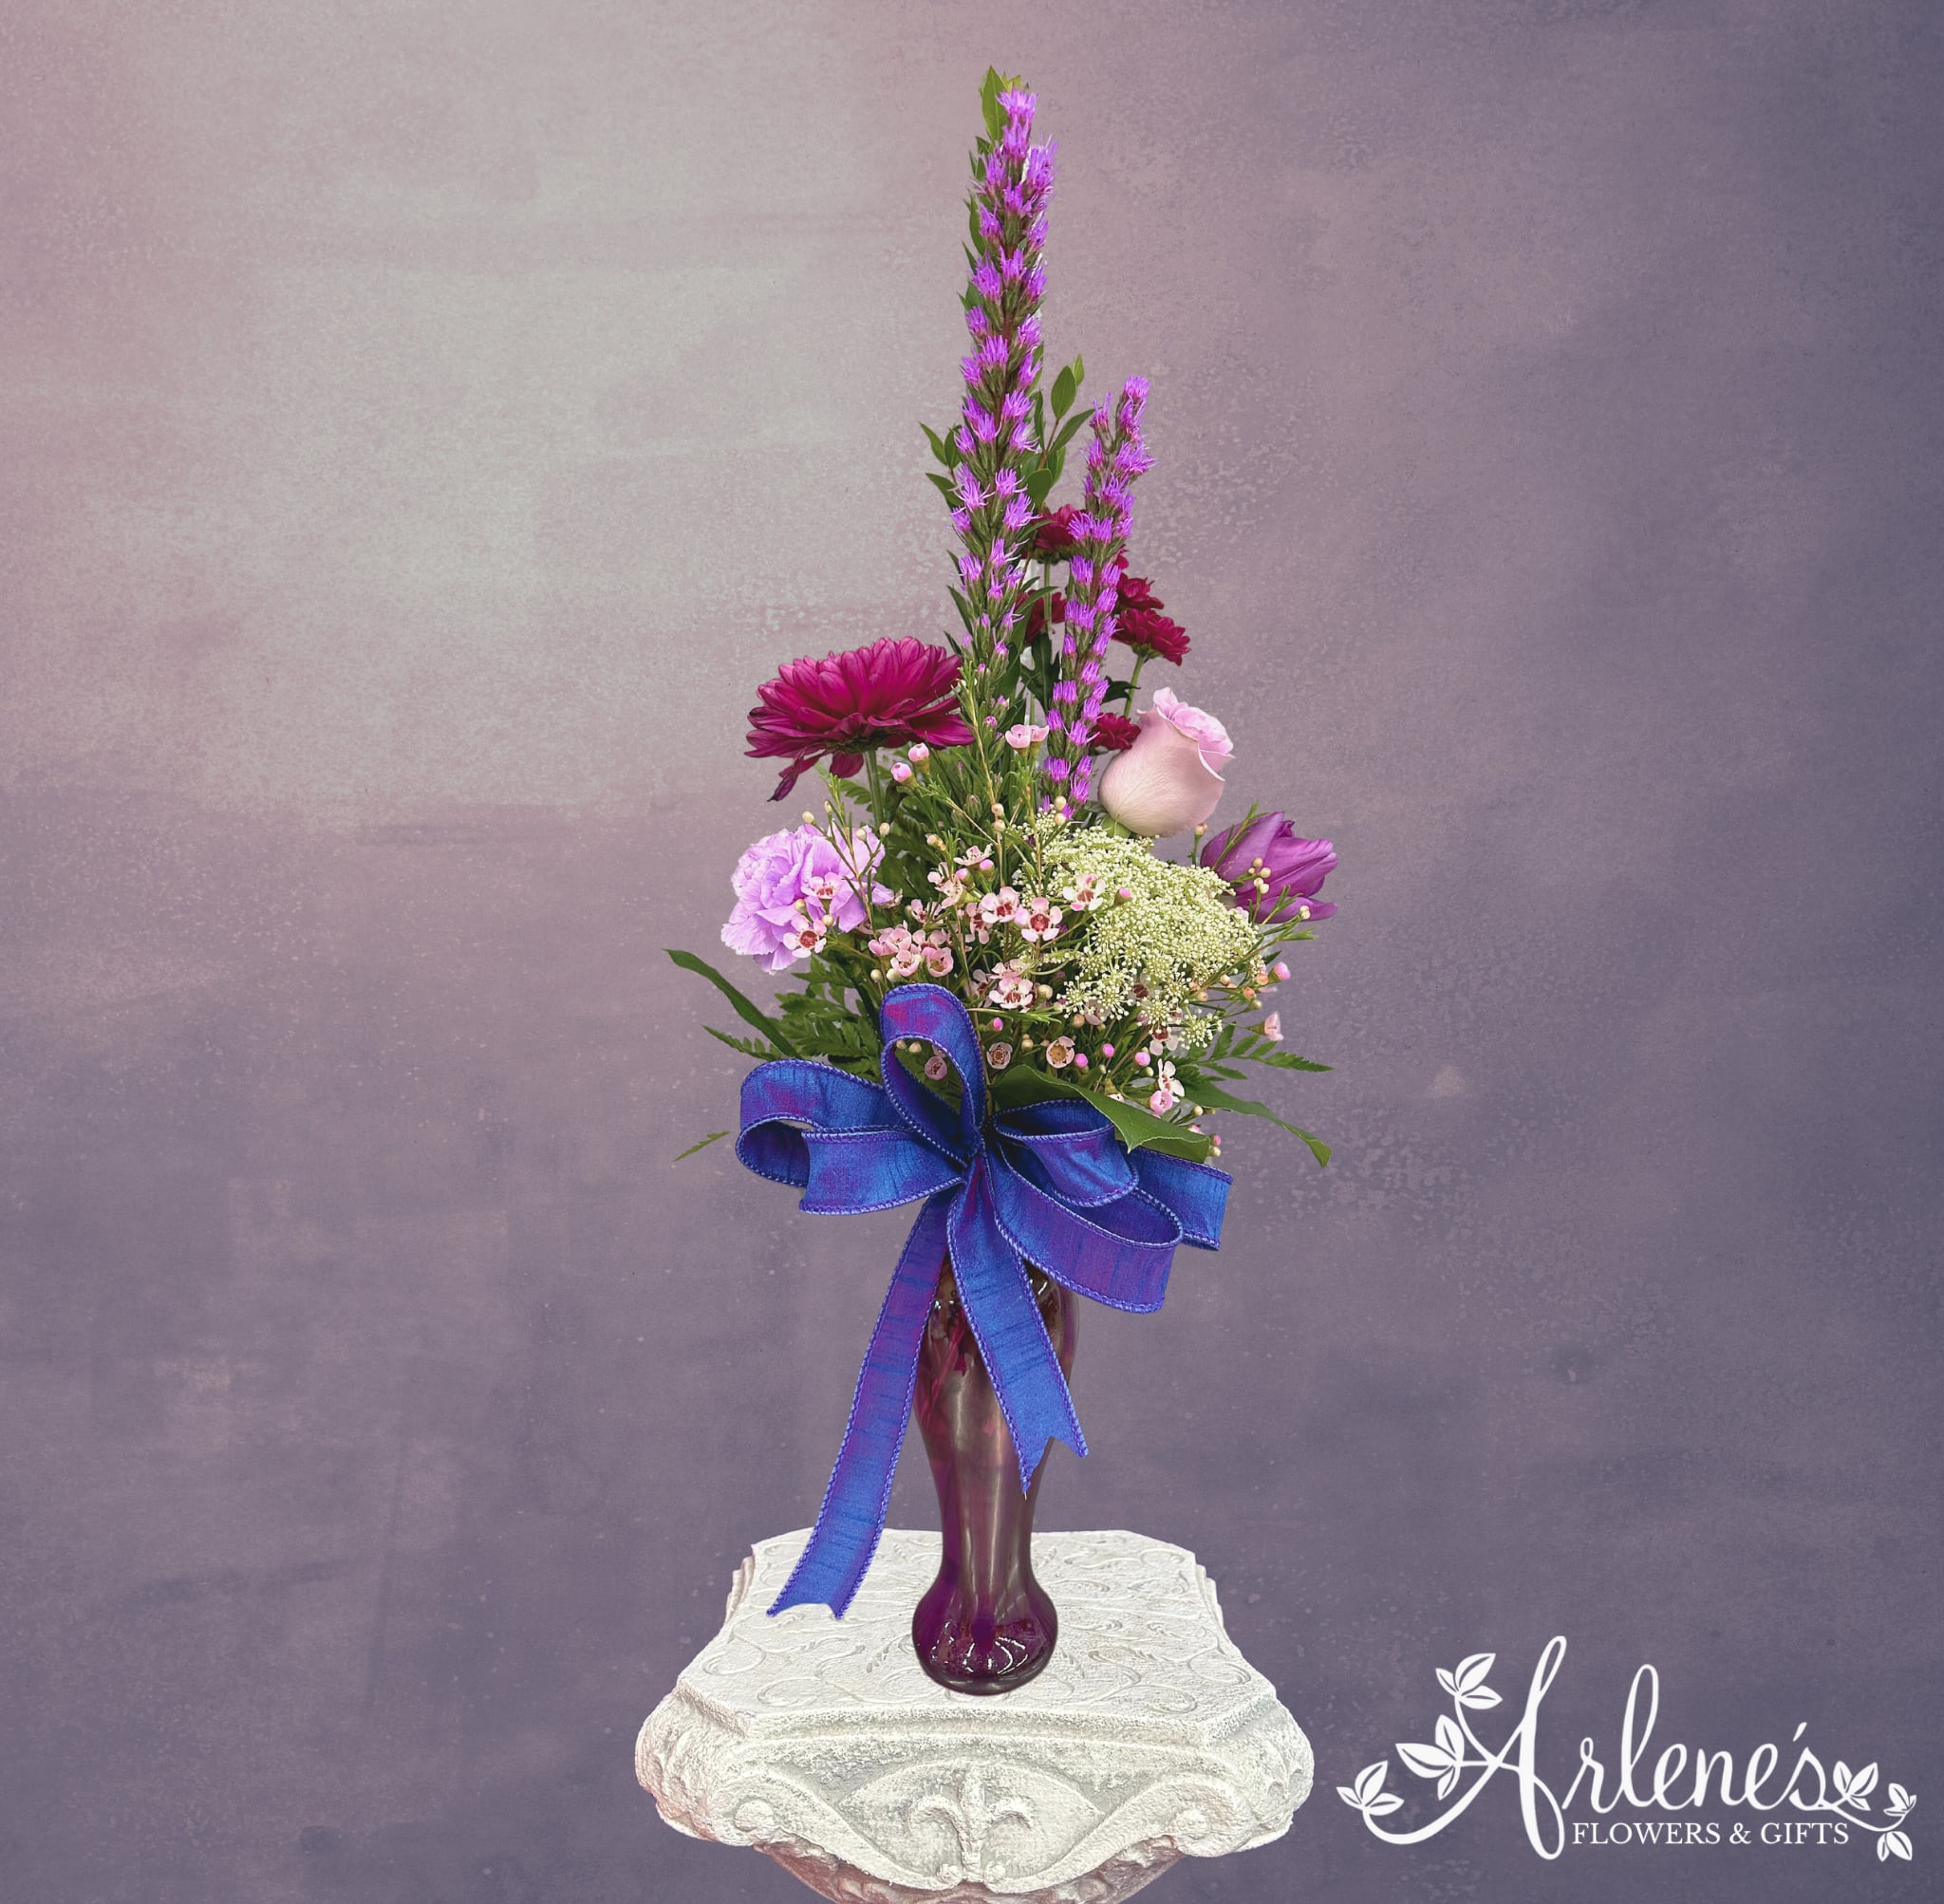 Little Amethyst - Is purple the passion of your princess? Grab her a Lil Amethyst! This sweet budvase will sweep her off her stilettos. A little bit of everything sets this bouquet up to be unique and sweet.